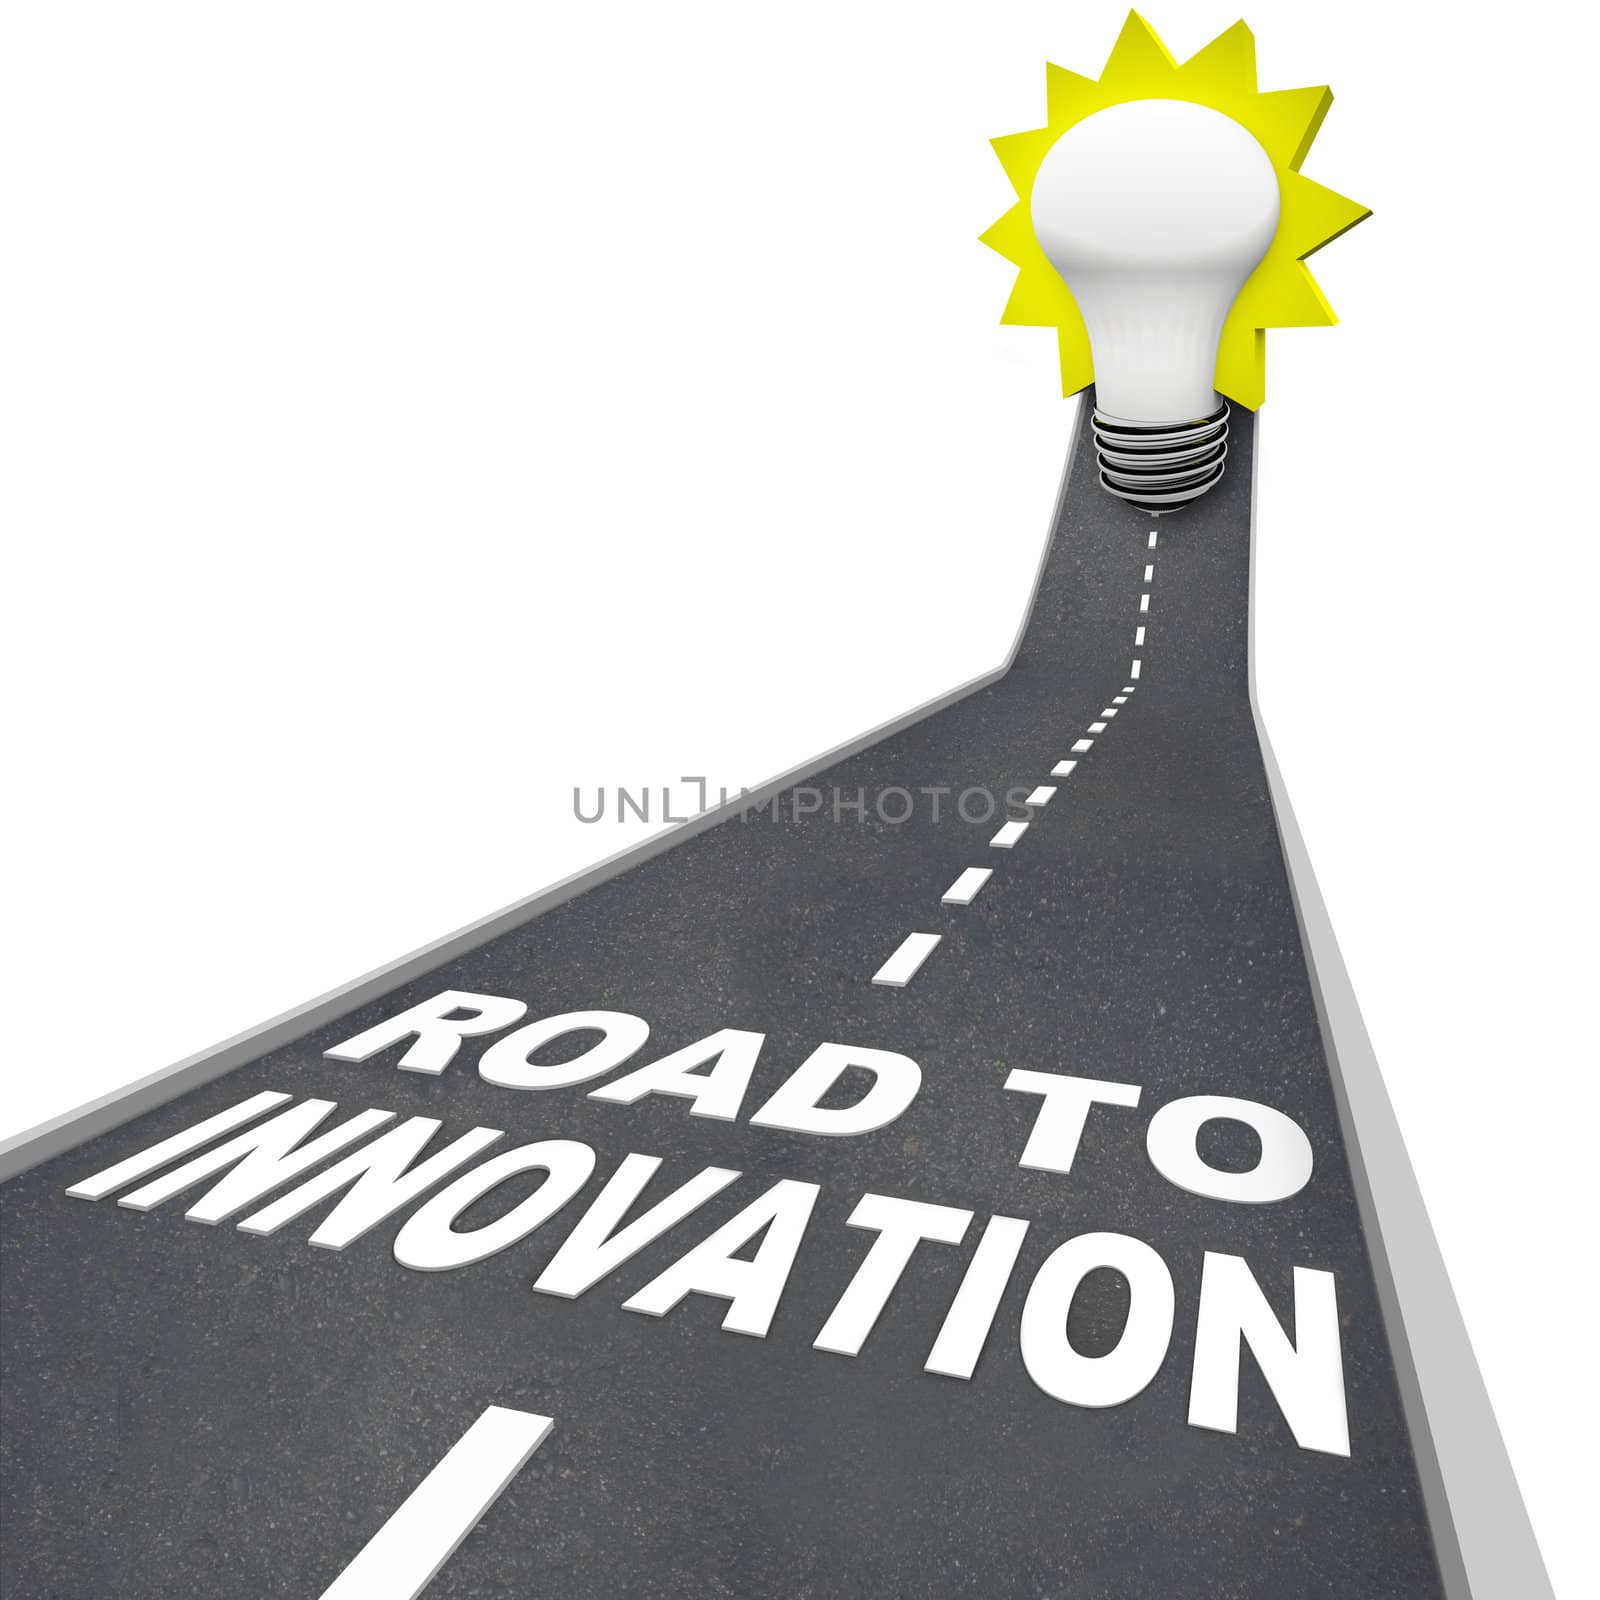 The words Road to Innovation on a pavement road leading upward to a light bulb representing imagination, creativity and idea generation in problem solving and success in reaching a goal